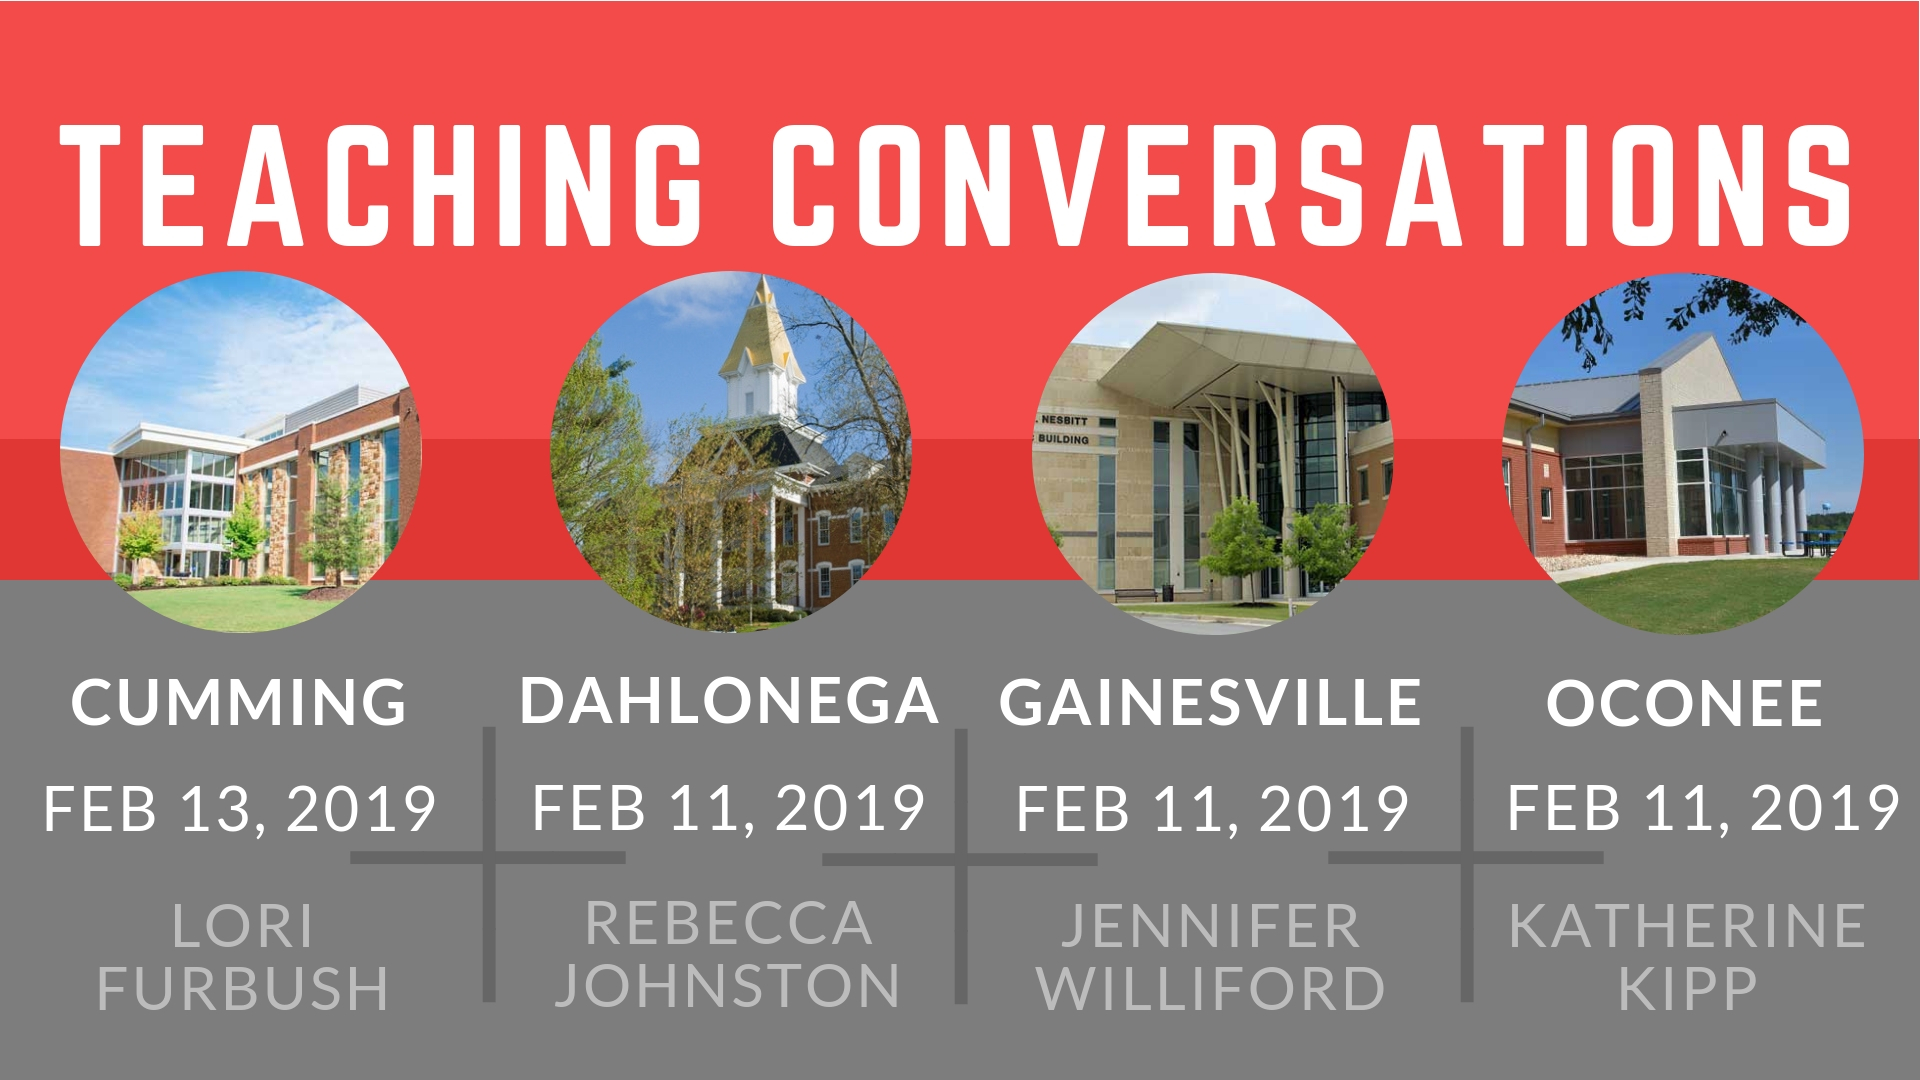 Teaching Conversations workshop information for Cumming, Dahlonega, Gainesville, and Oconee campuses